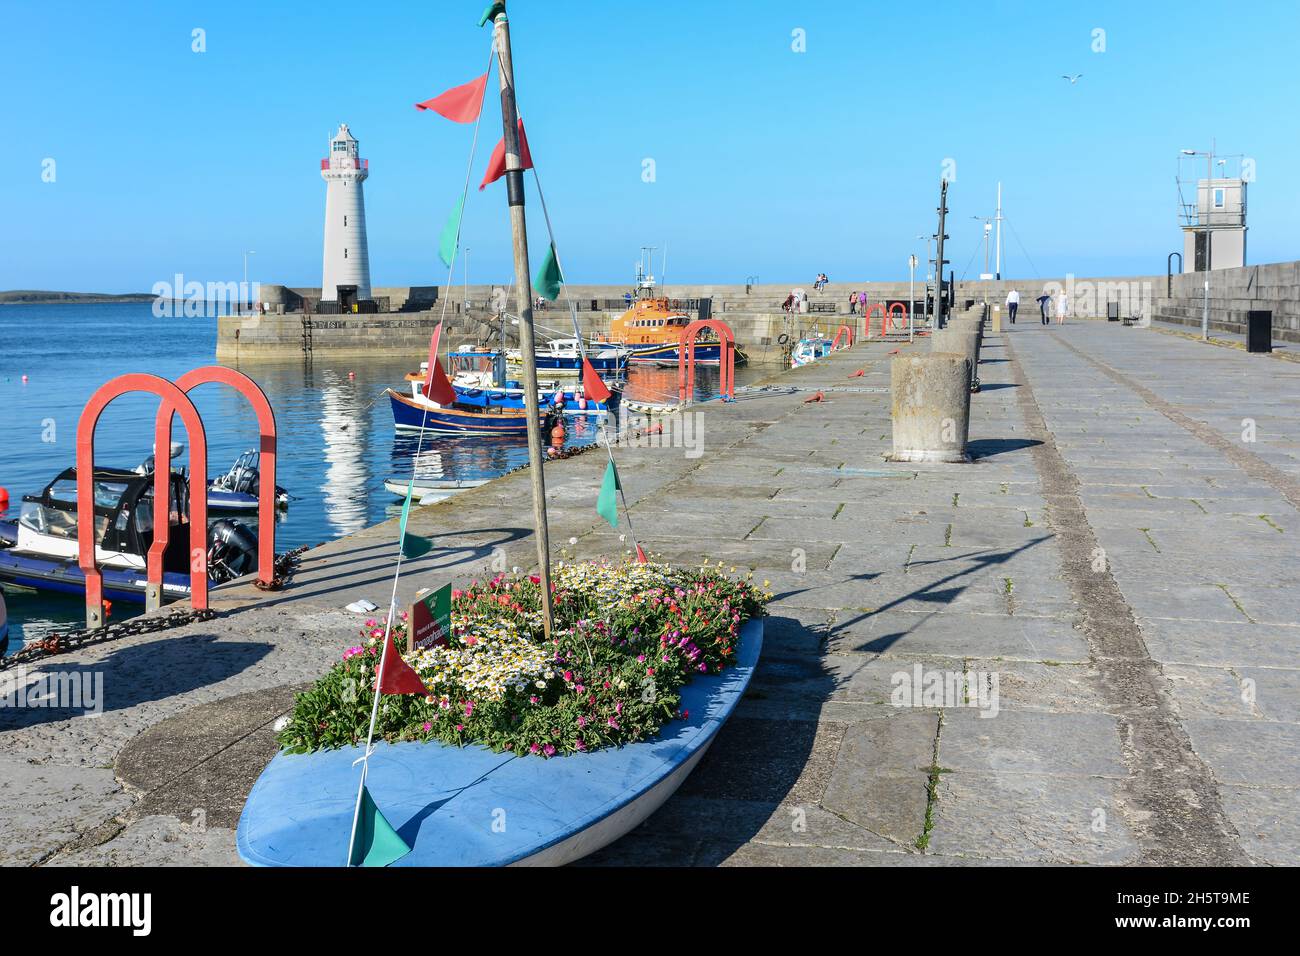 Donaghadee,Northern Ireland,United Kingdom - September 1, 2021: The Donaghadee lighthouse view from the pier Stock Photo